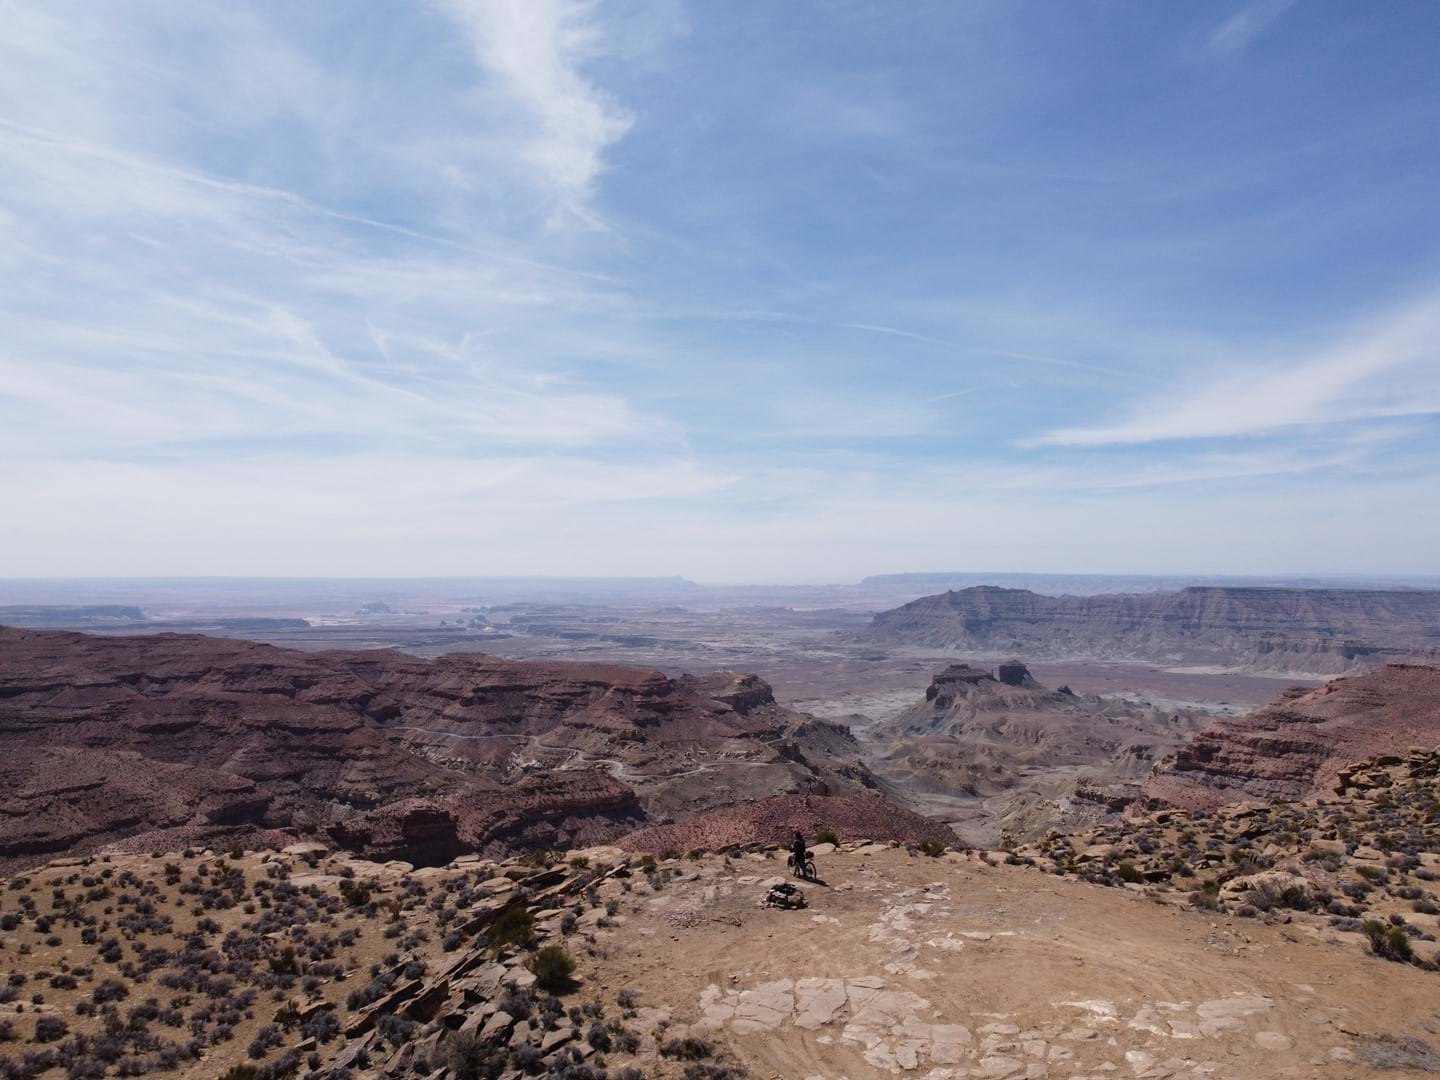 Incredible view of the desert while bikepacking